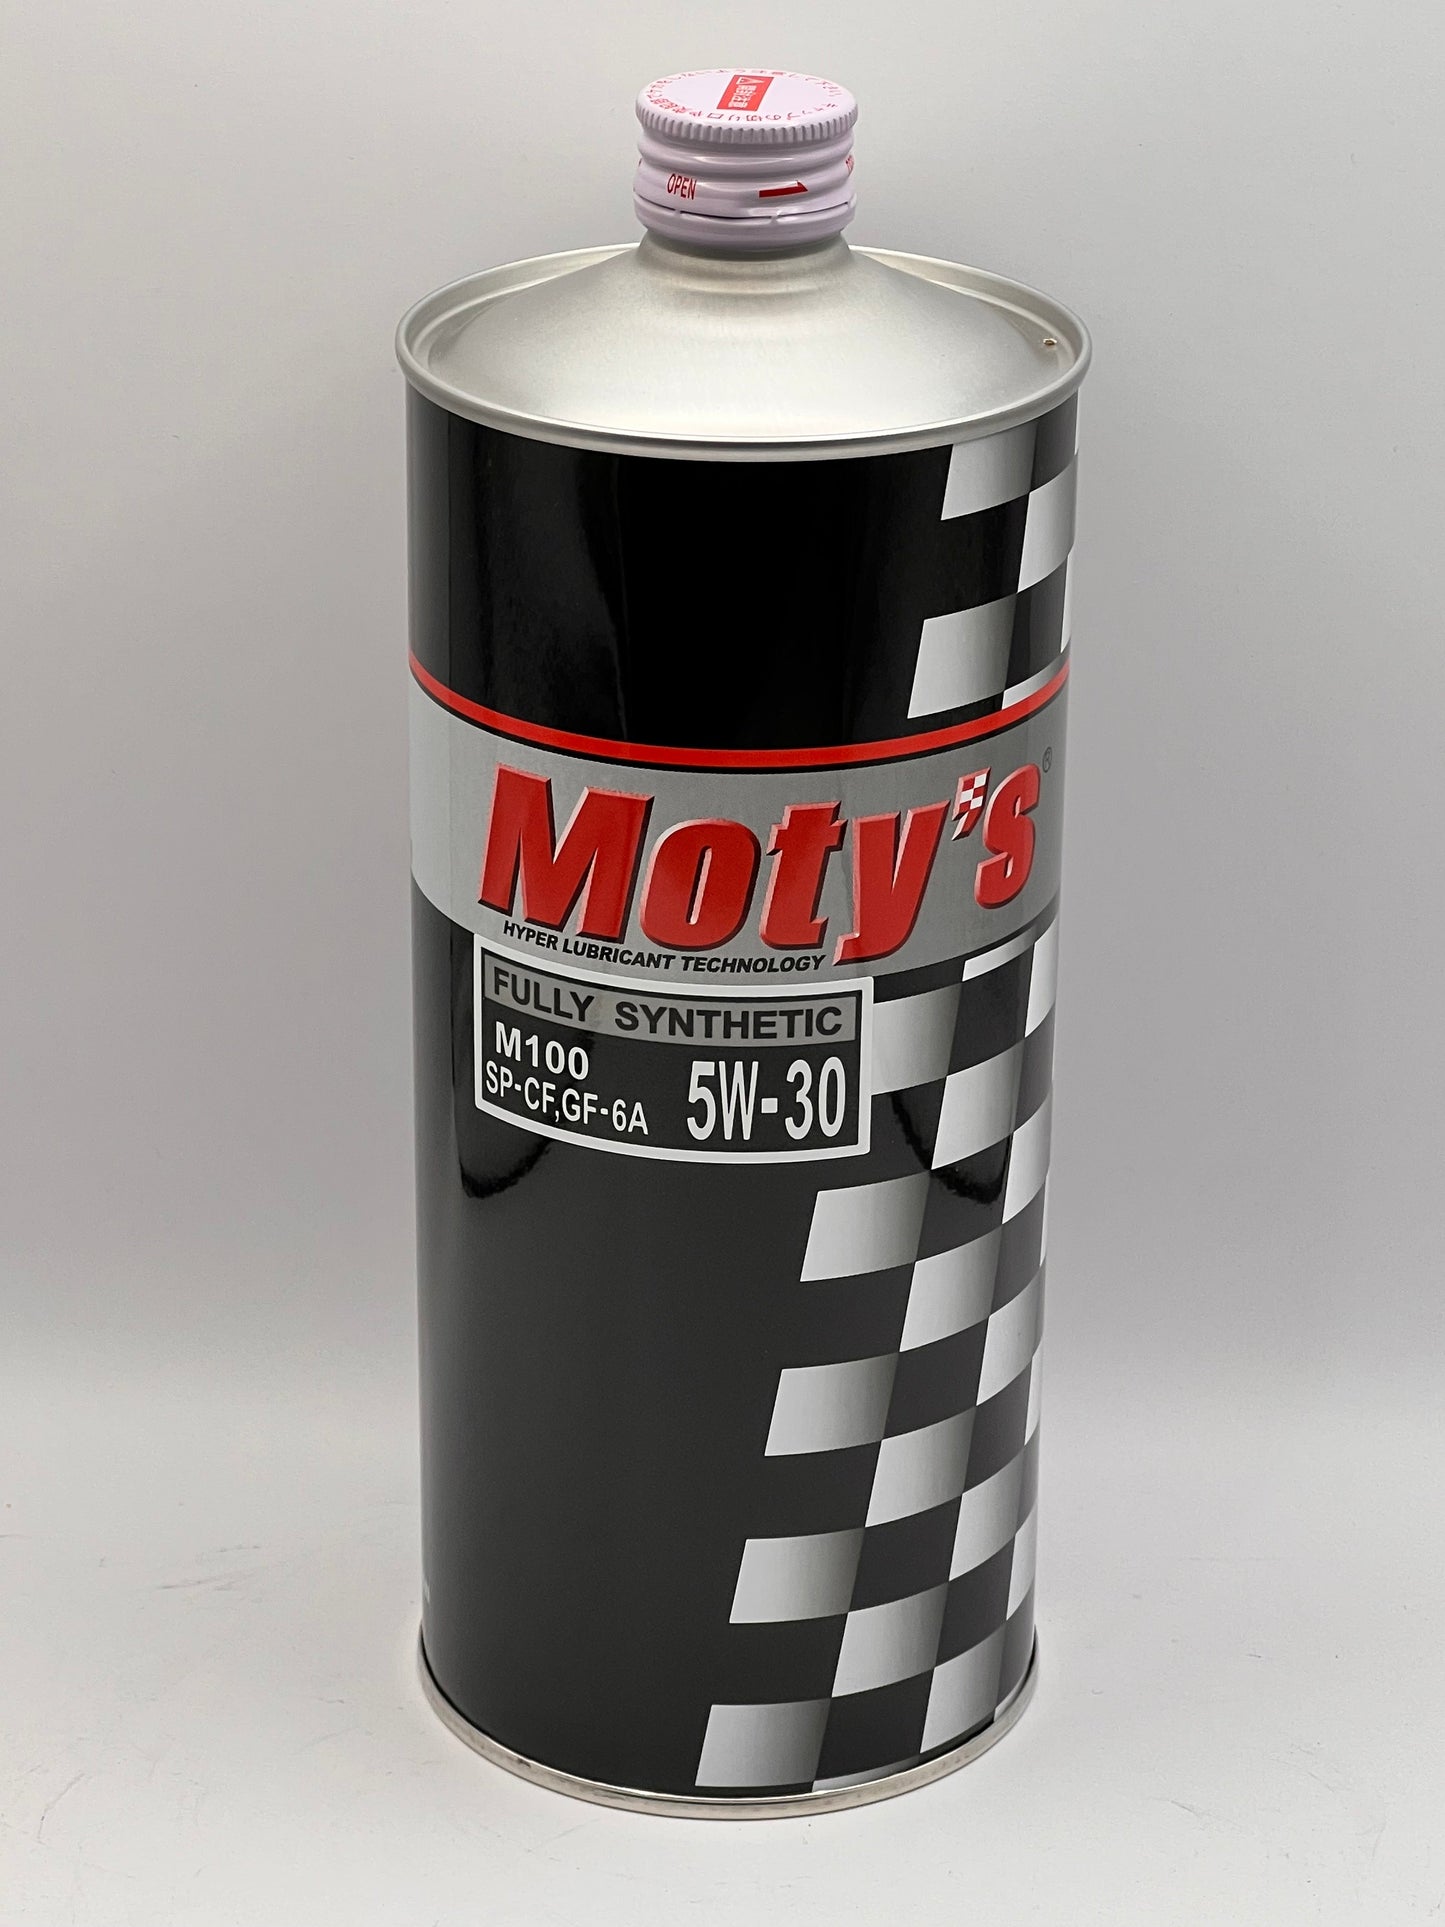 Moty's Motor Oil Fully Synthetic M100 5W-30 1 Litres